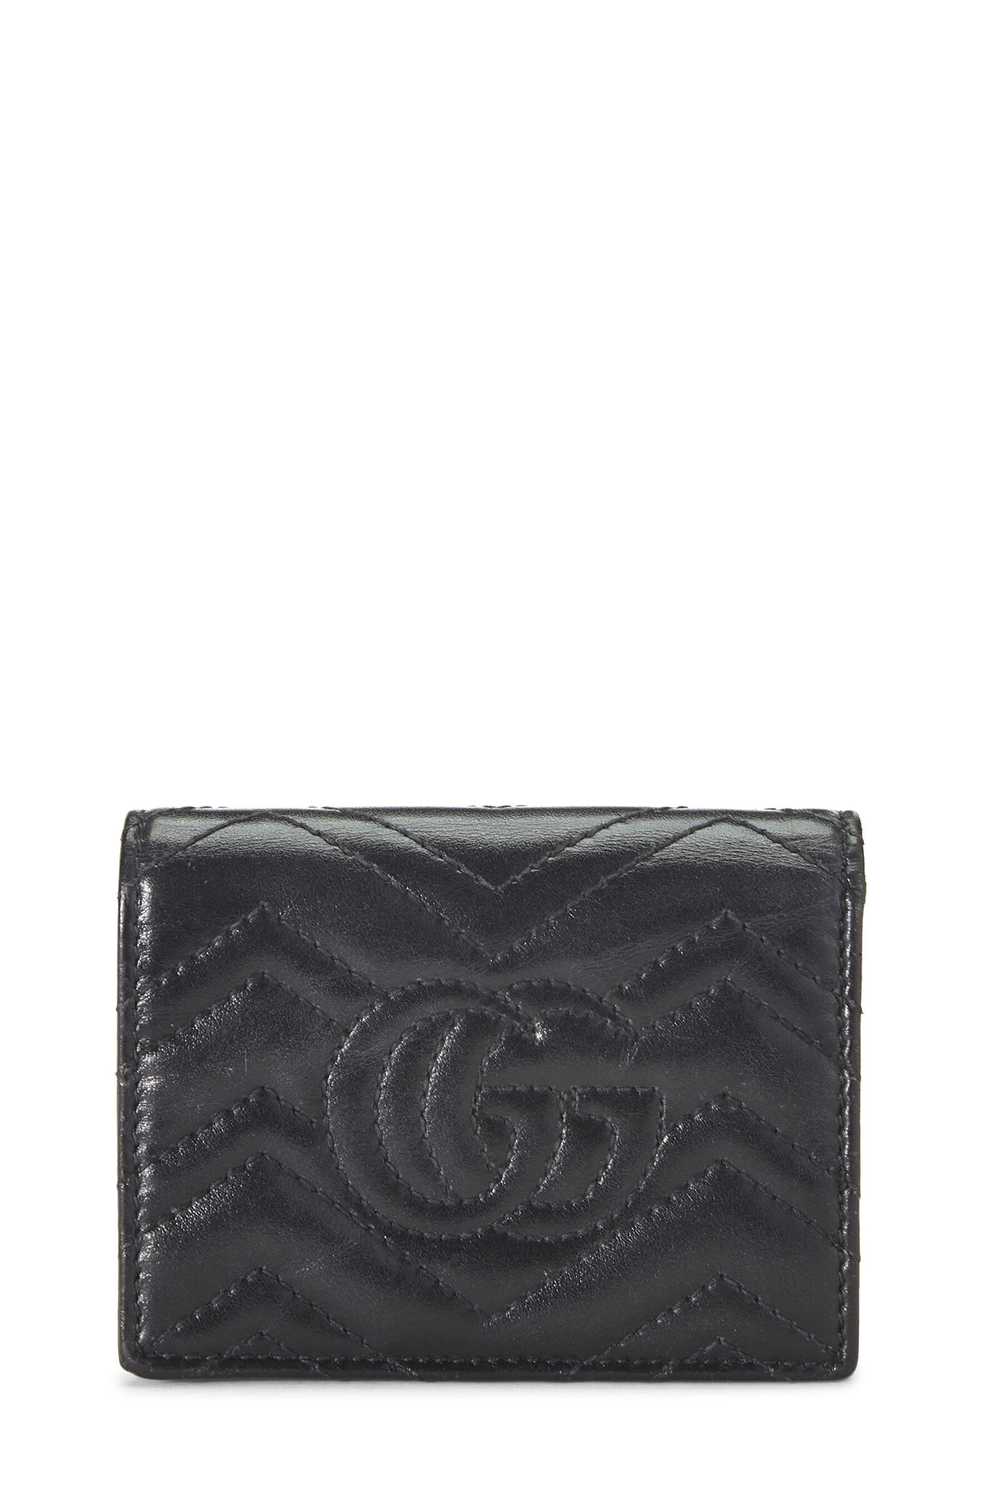 Black Leather GG Marmont Card Case - image 3